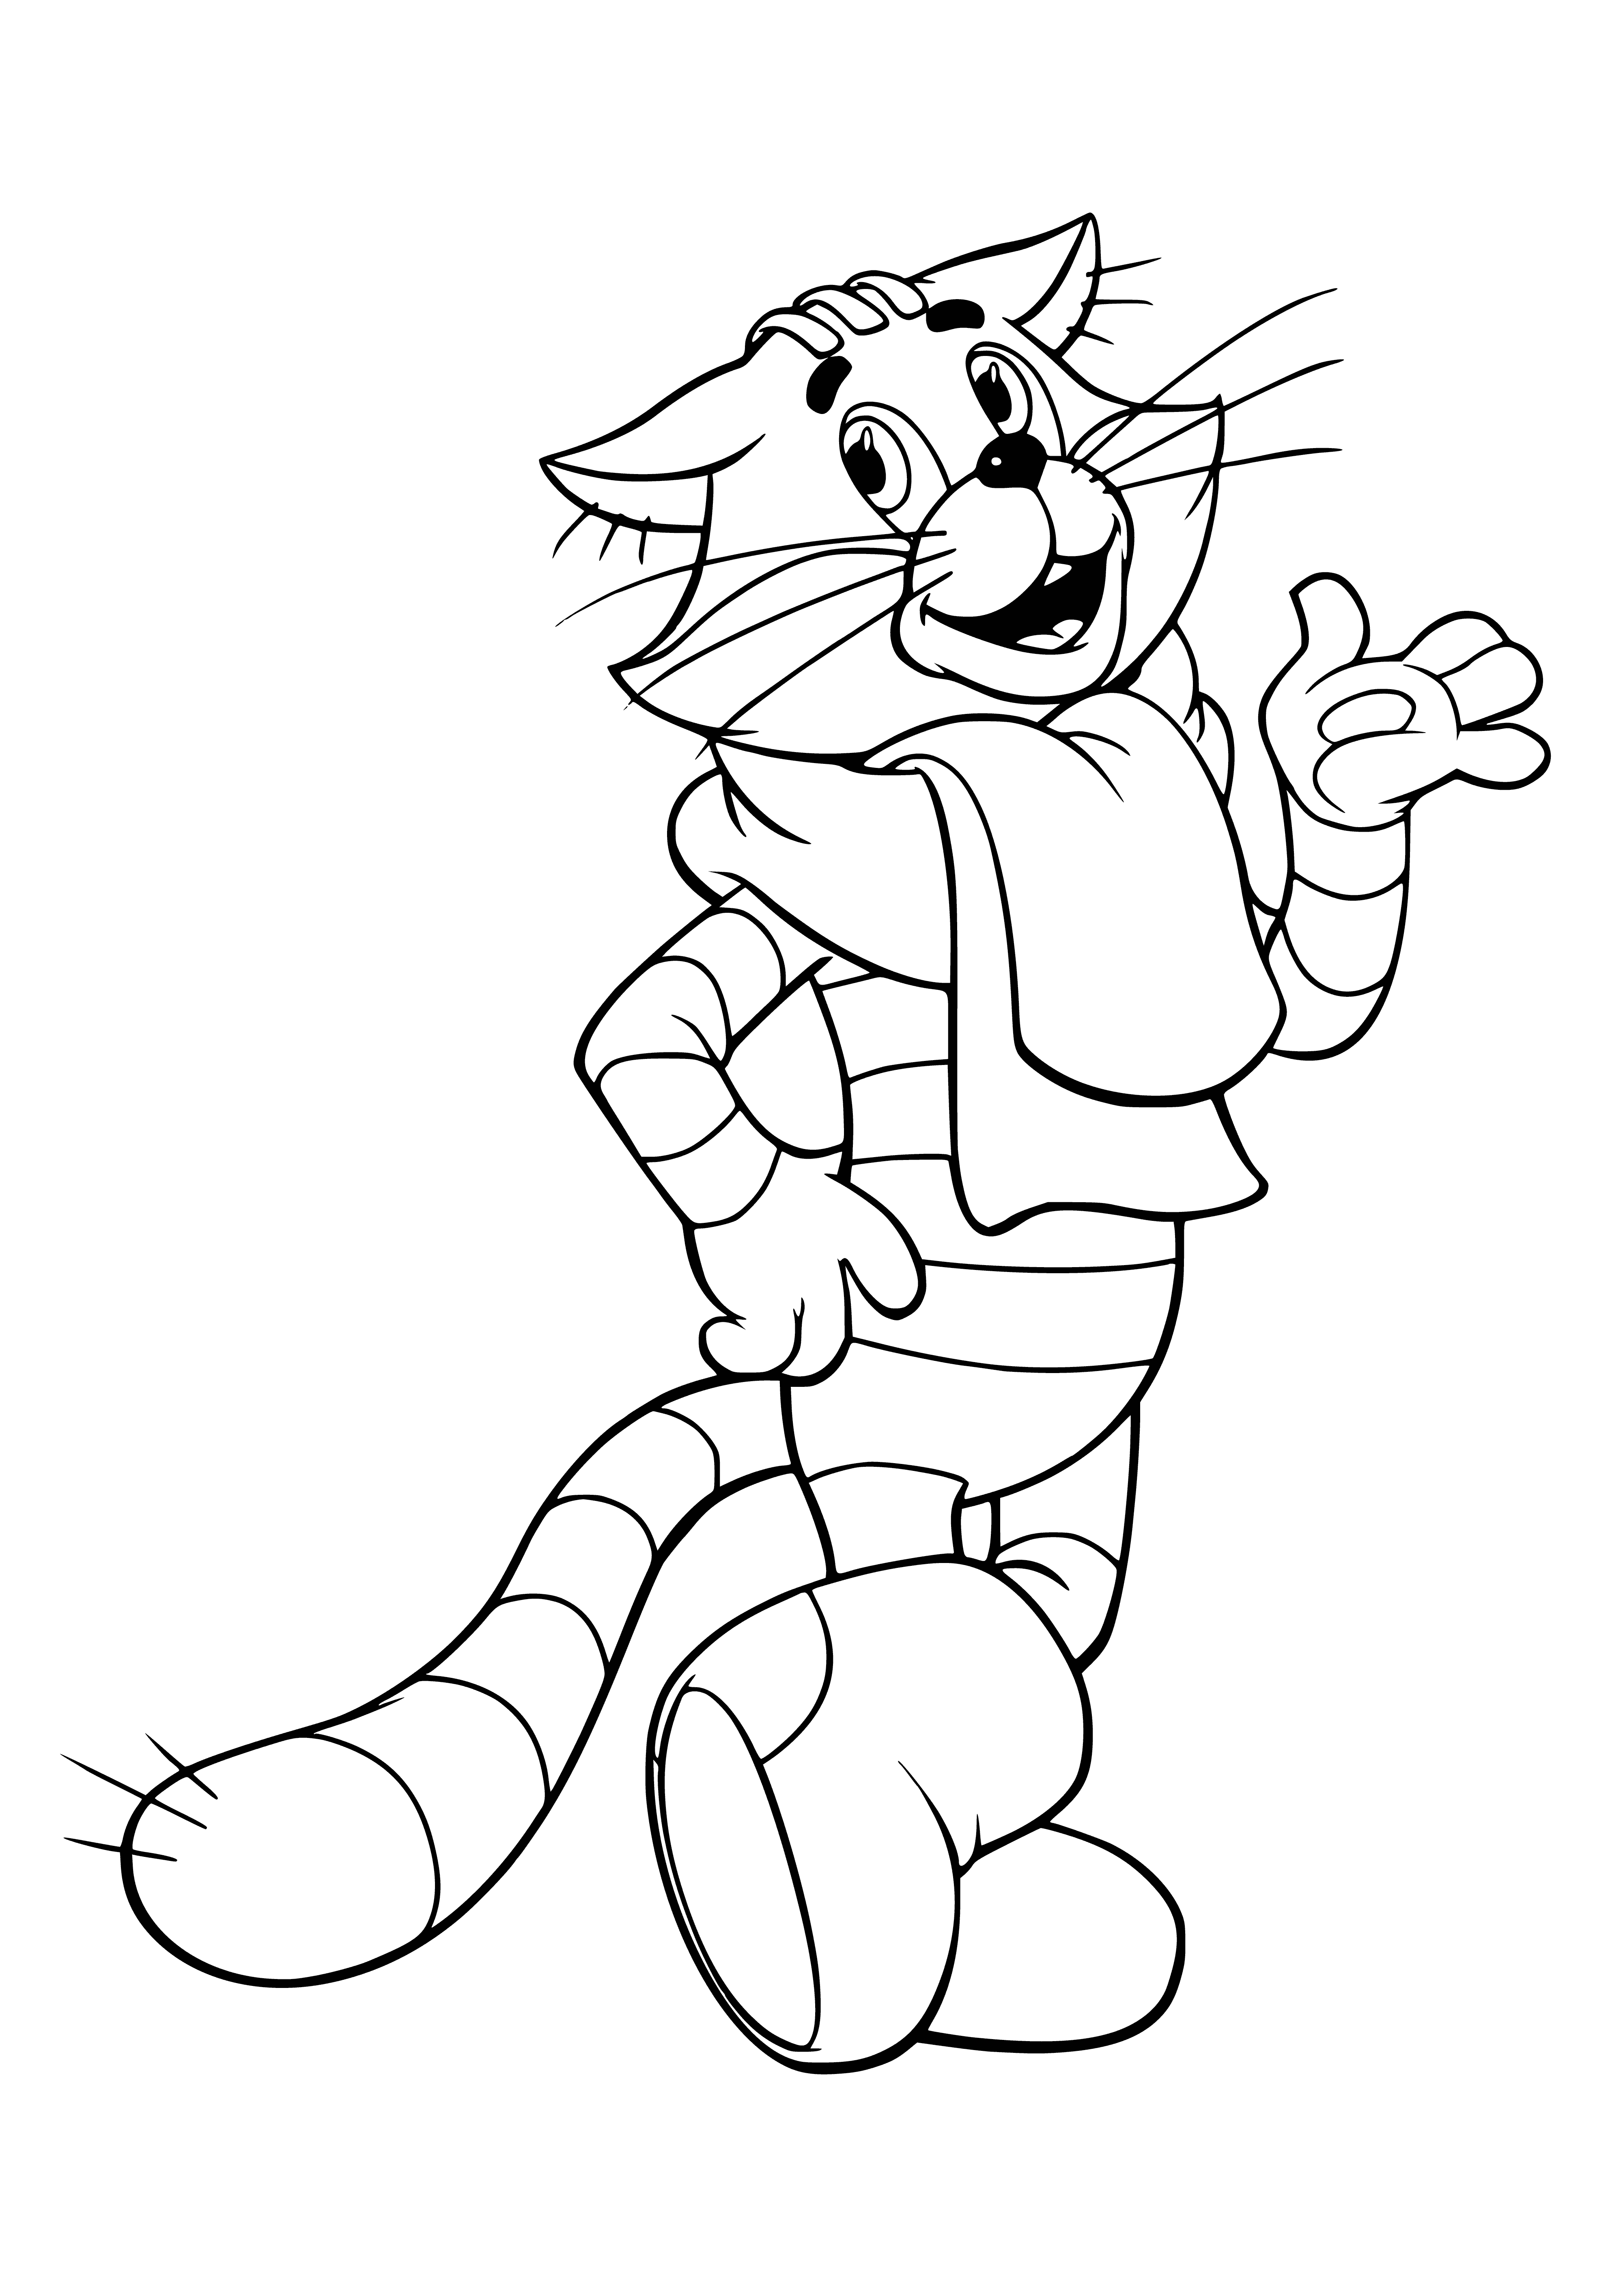 coloring page: Famous Russian cat Matroskin is in a coloring page - an orange feline waiting to be brought to life!